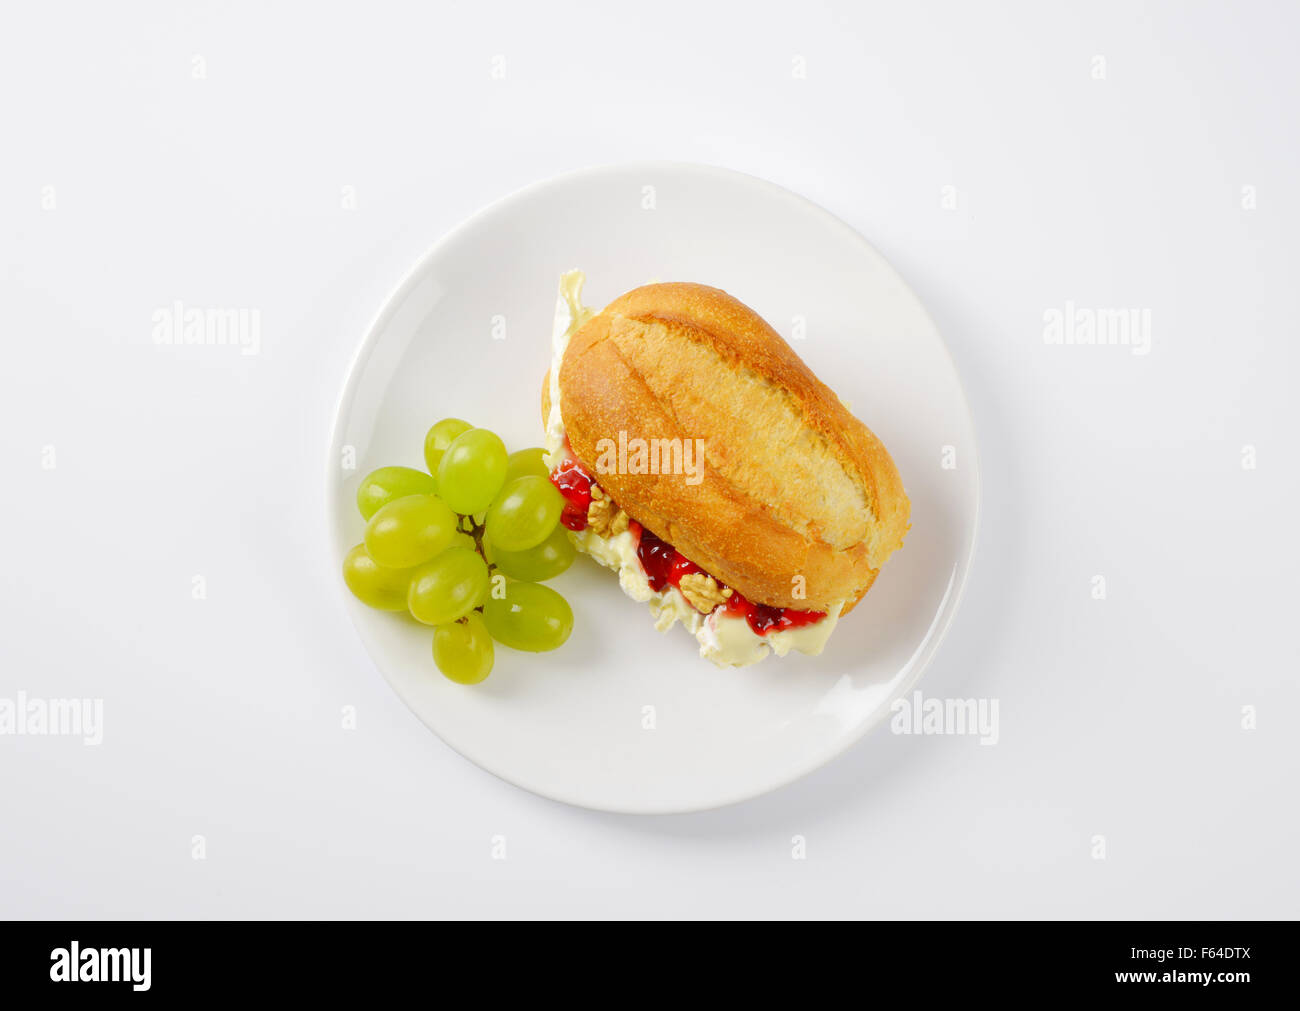 small baguette with brie cheese, walnuts, jam and grapes on white plate Stock Photo